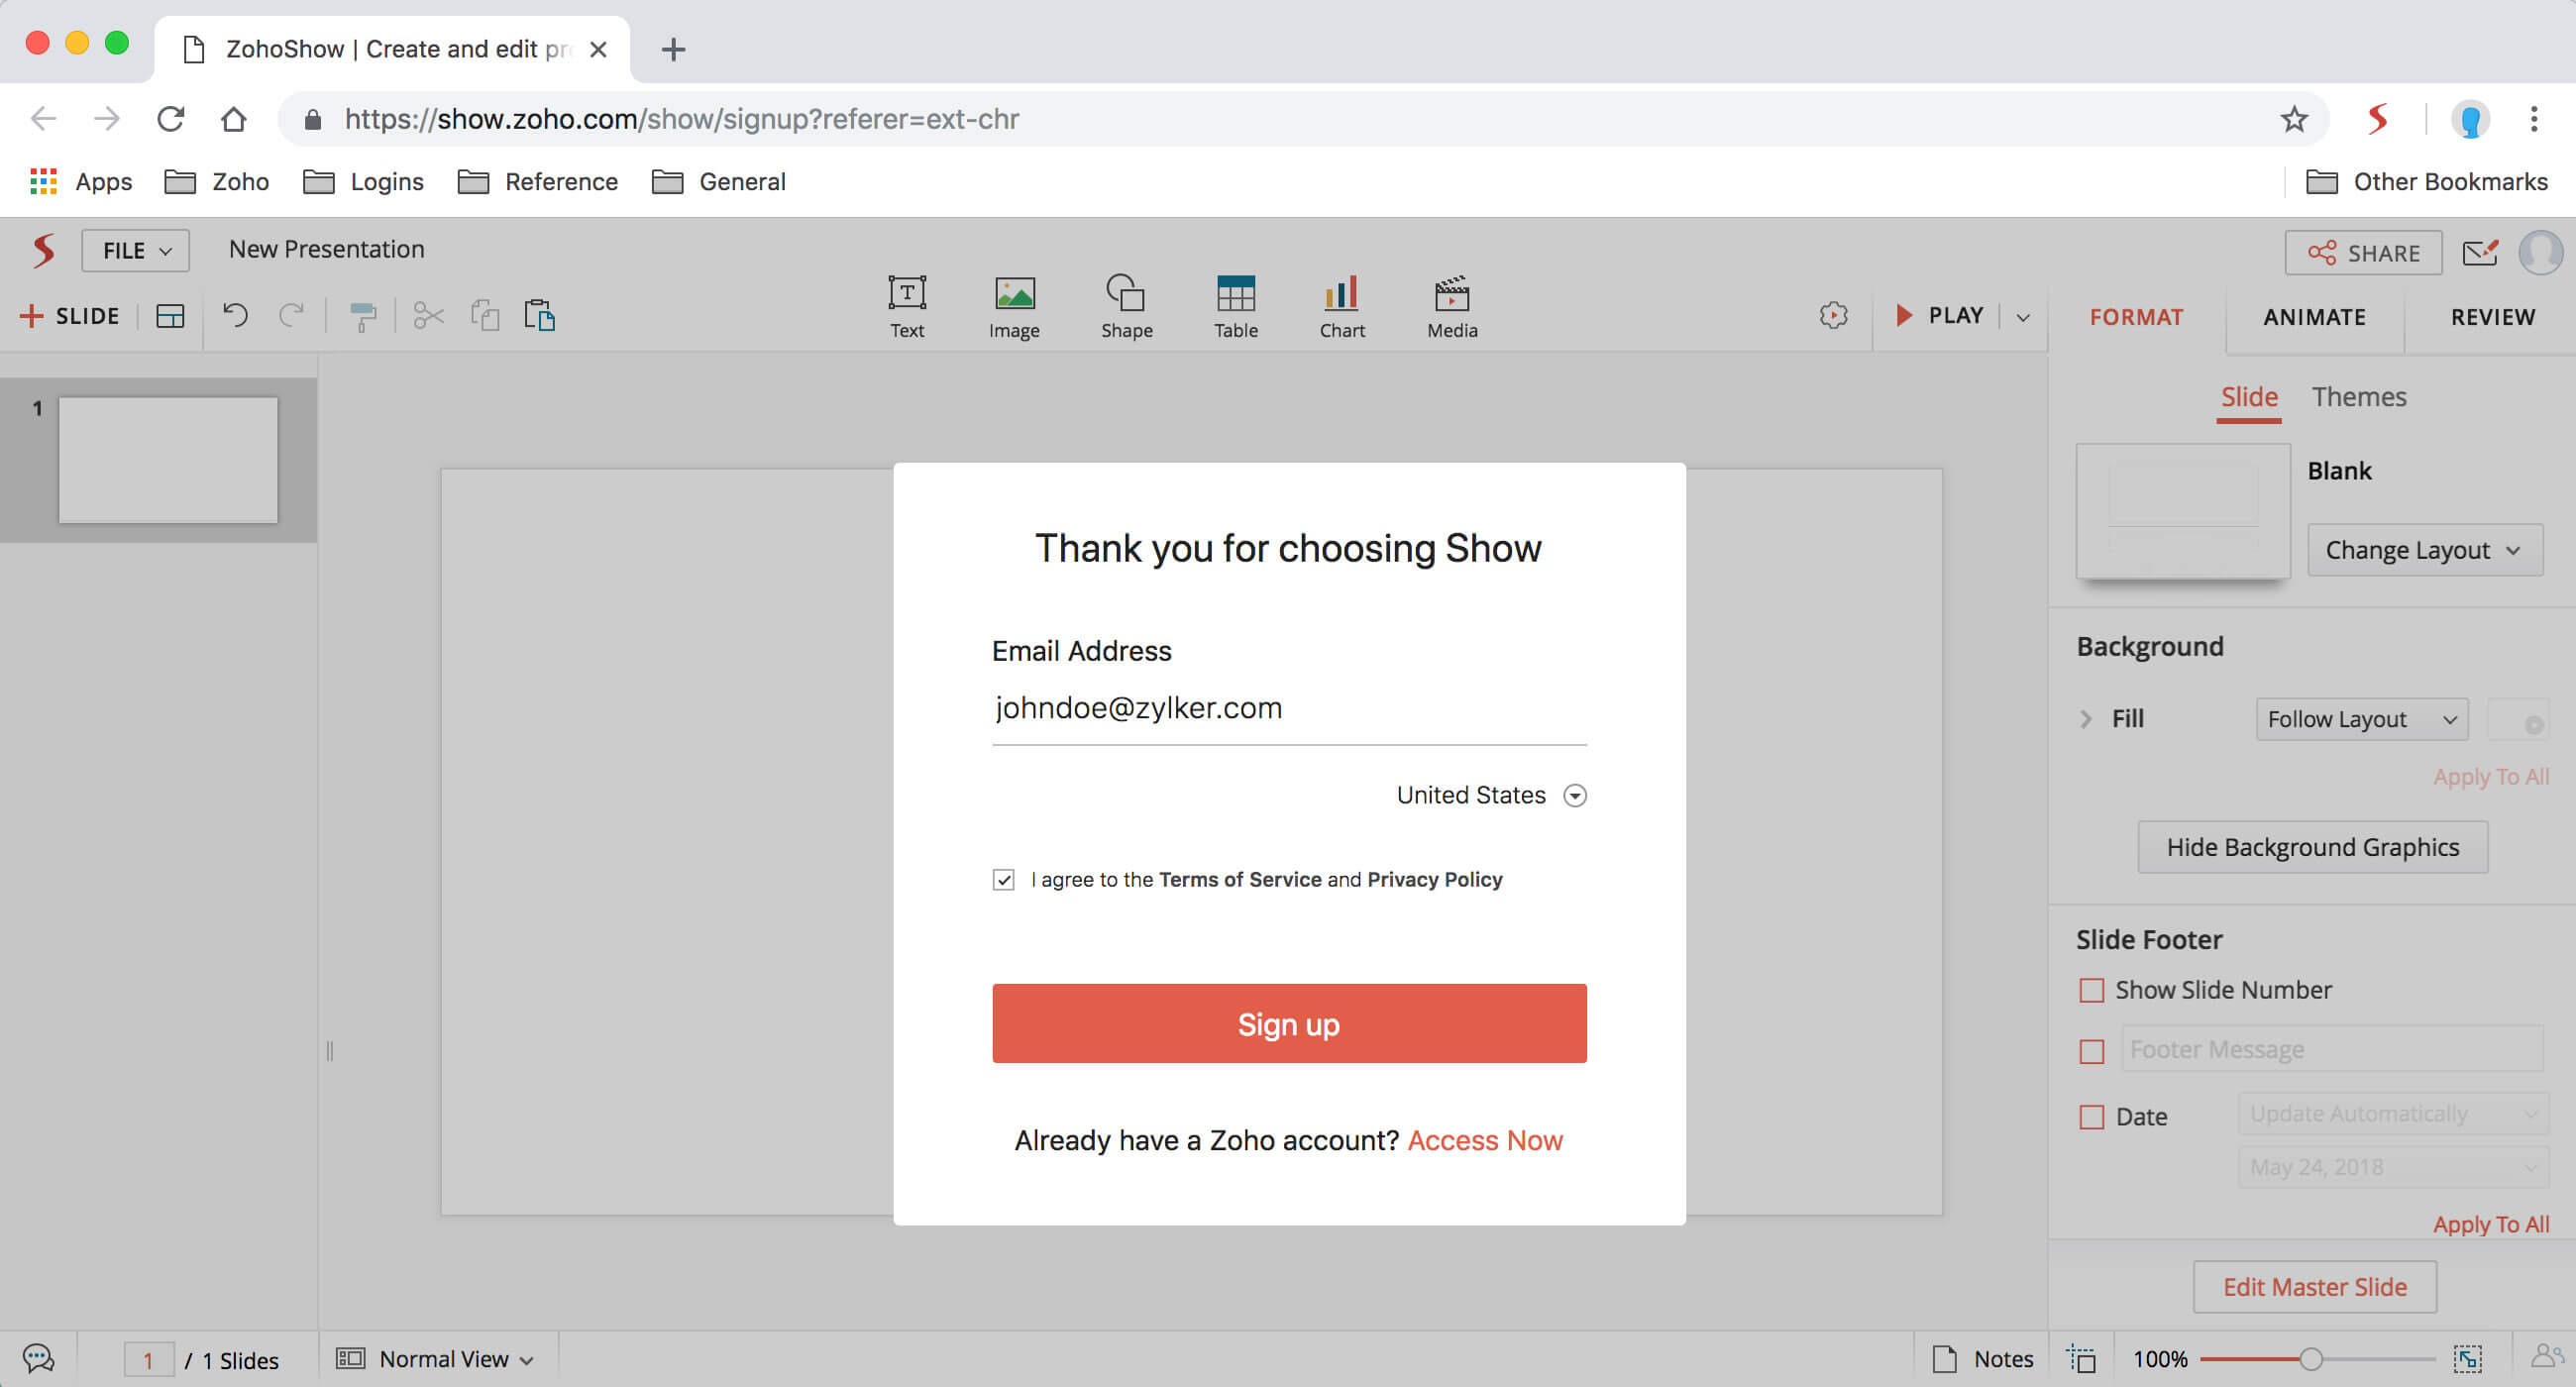 Enter your details in Zoho Show sign up form.